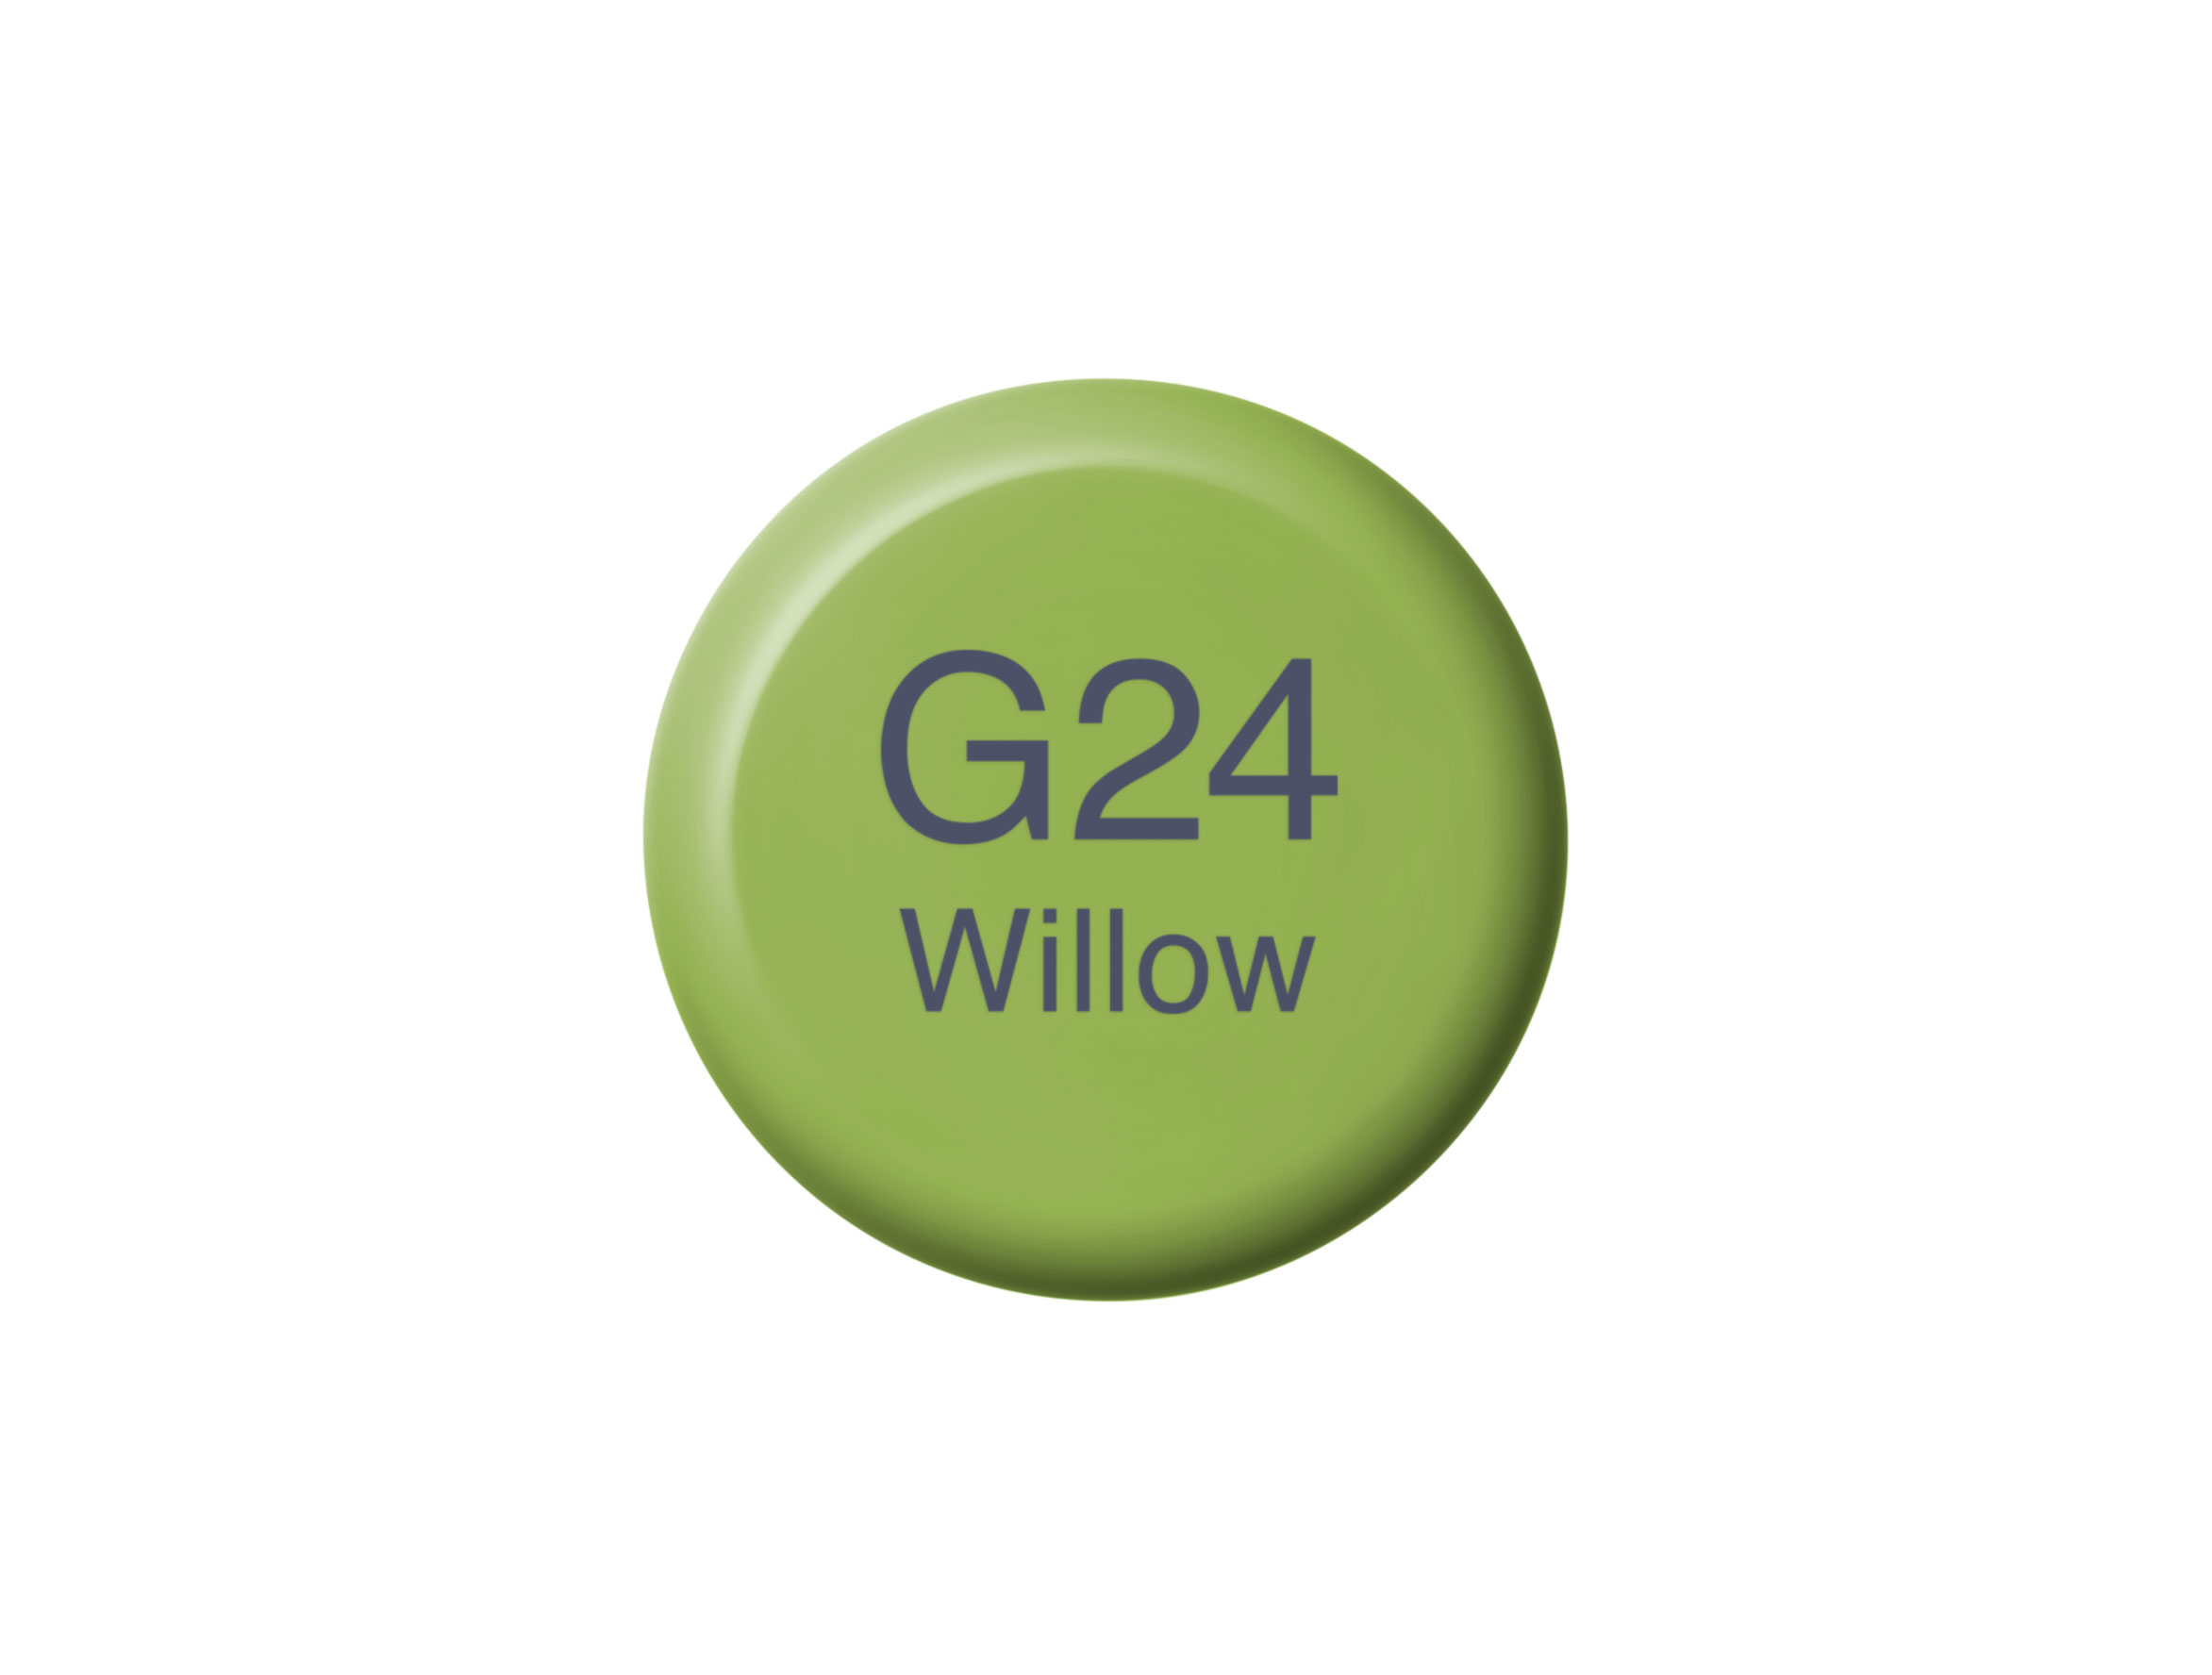 Copic Ink G24 Willow